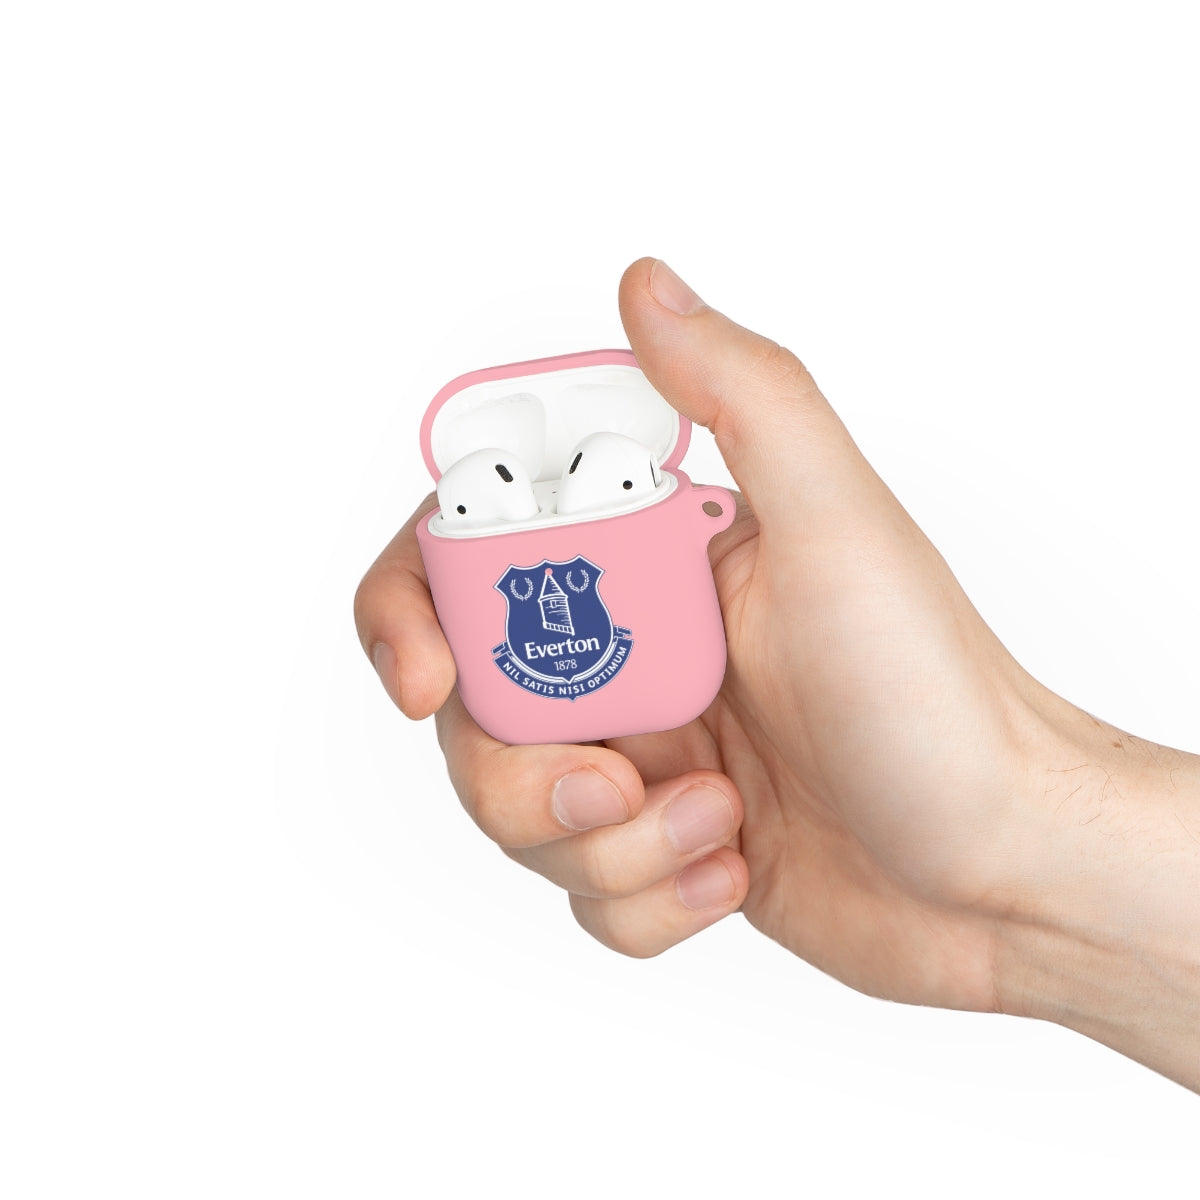 Everton AirPods and AirPods Pro Case Cover